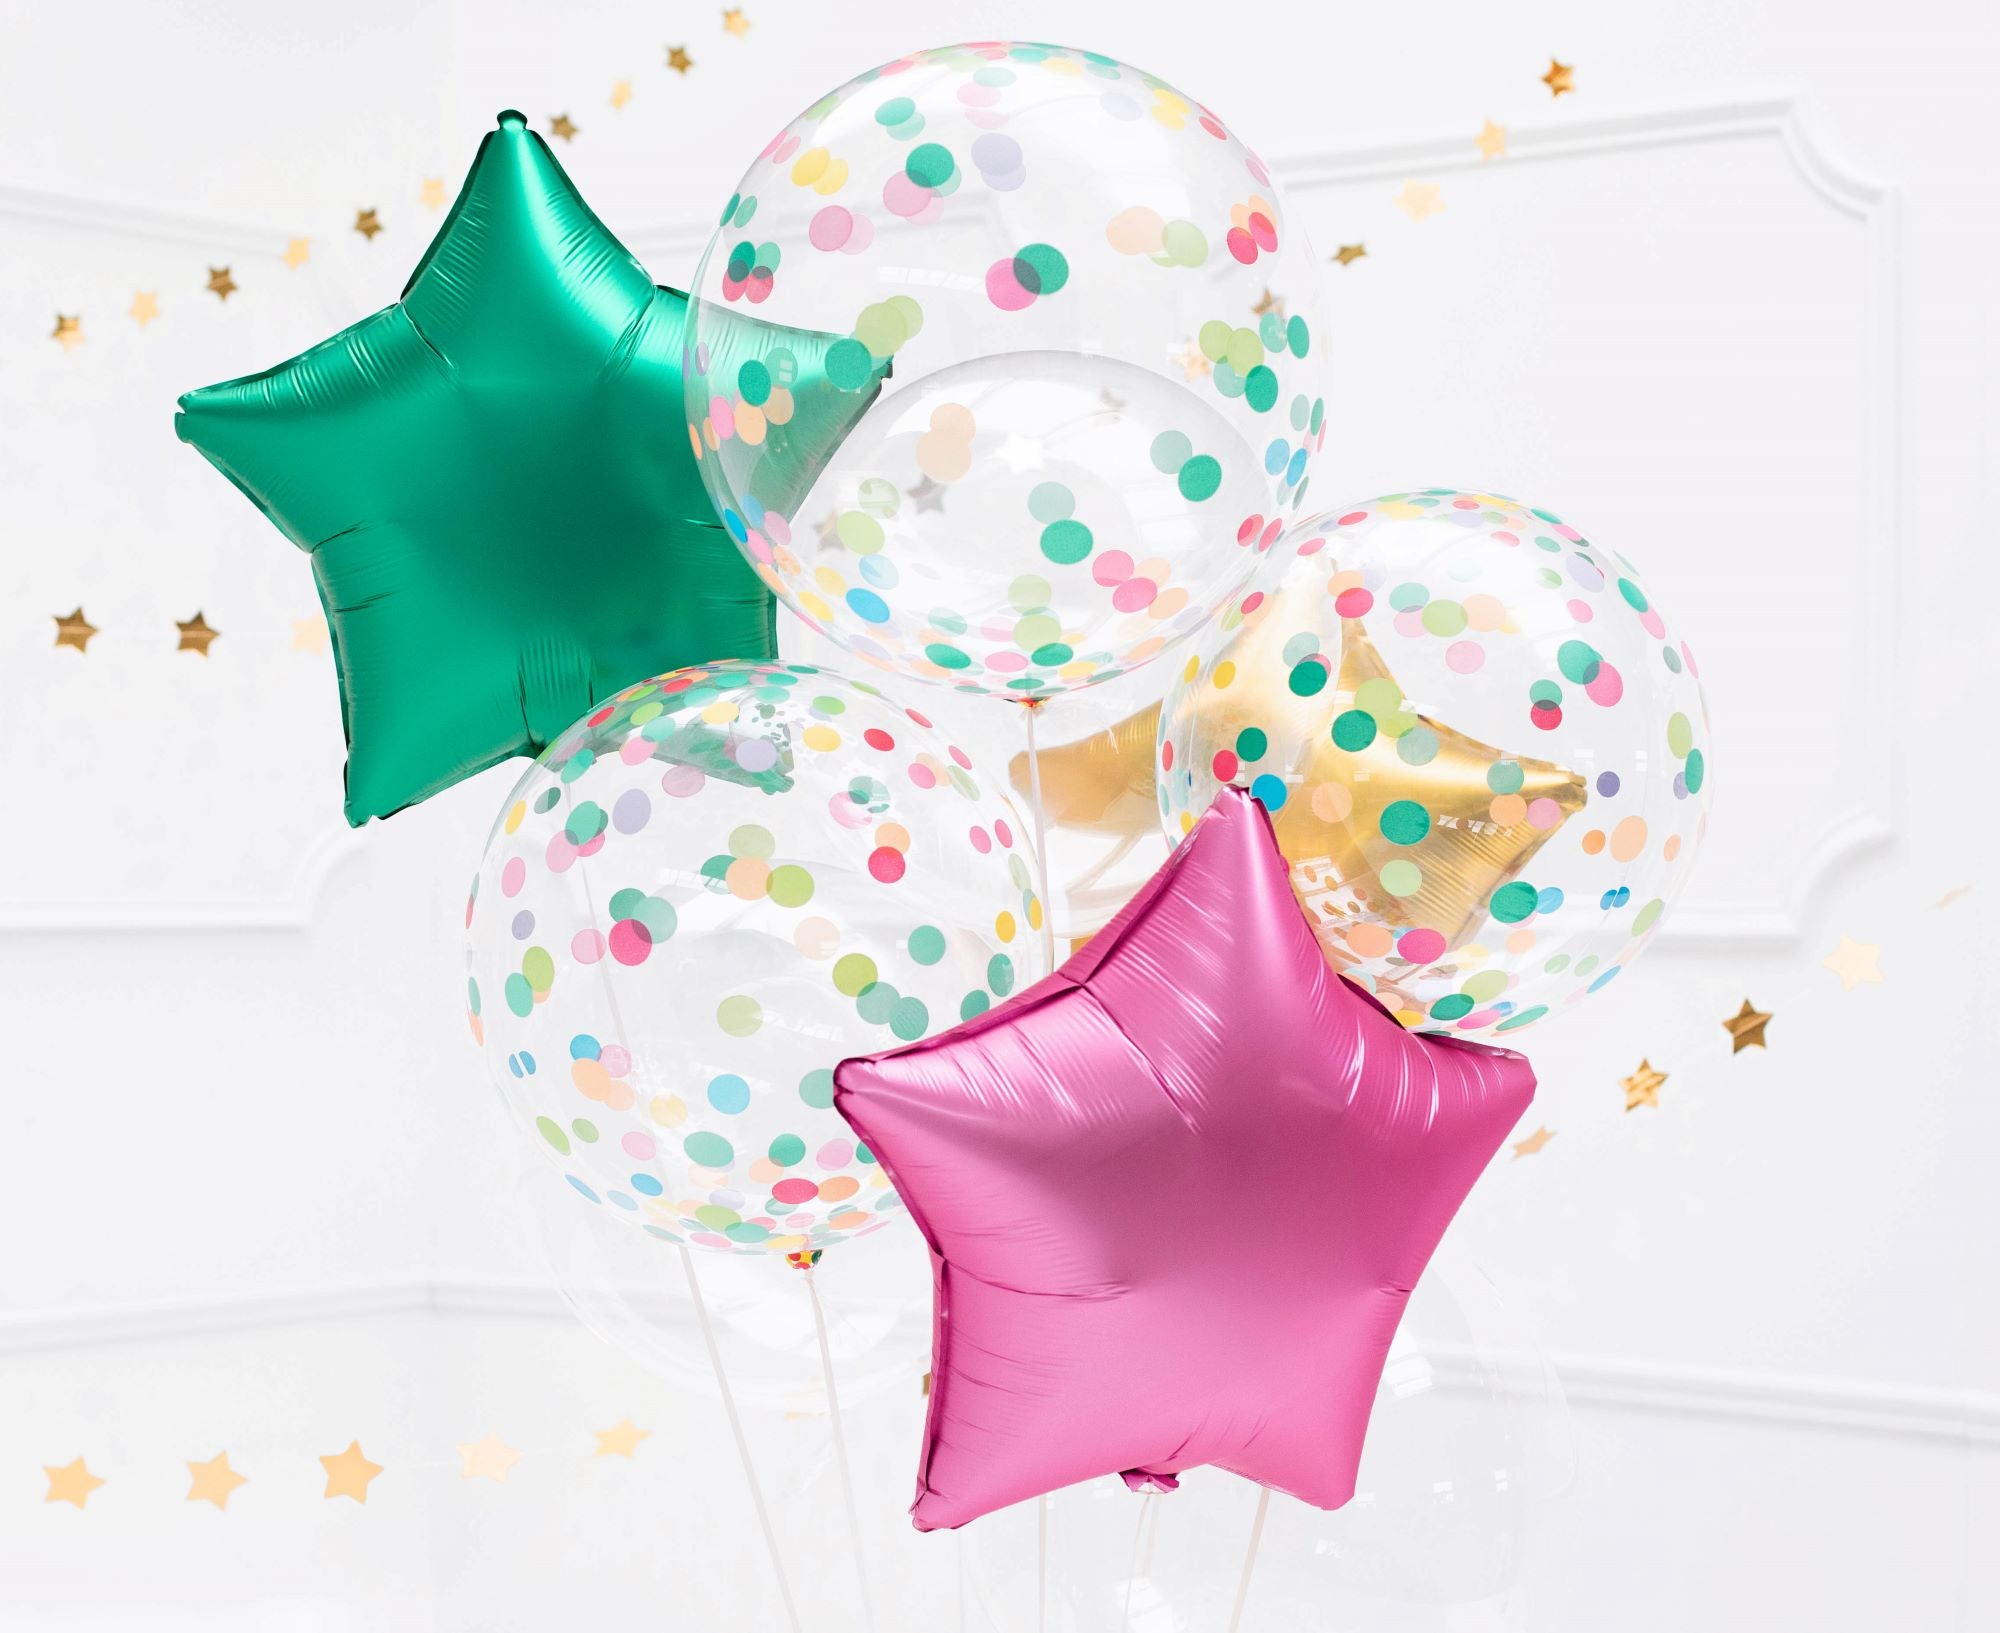 Orbz Balloon with Coloured Dots party decoration